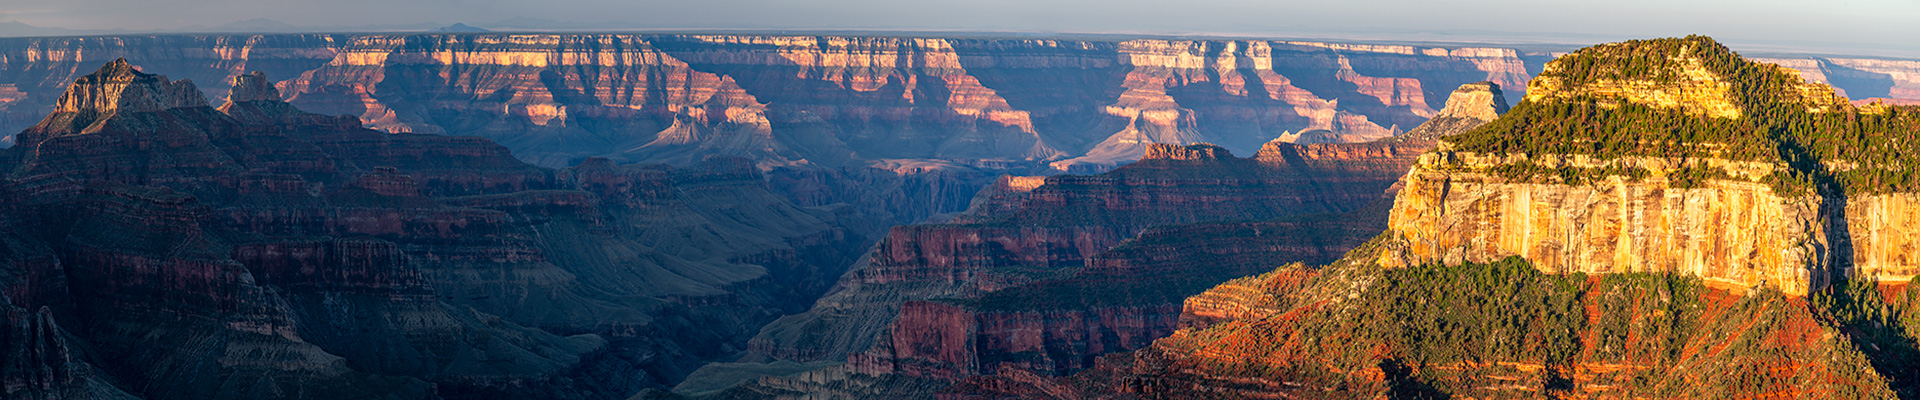 Wide View from North Rim of Grand Canyon